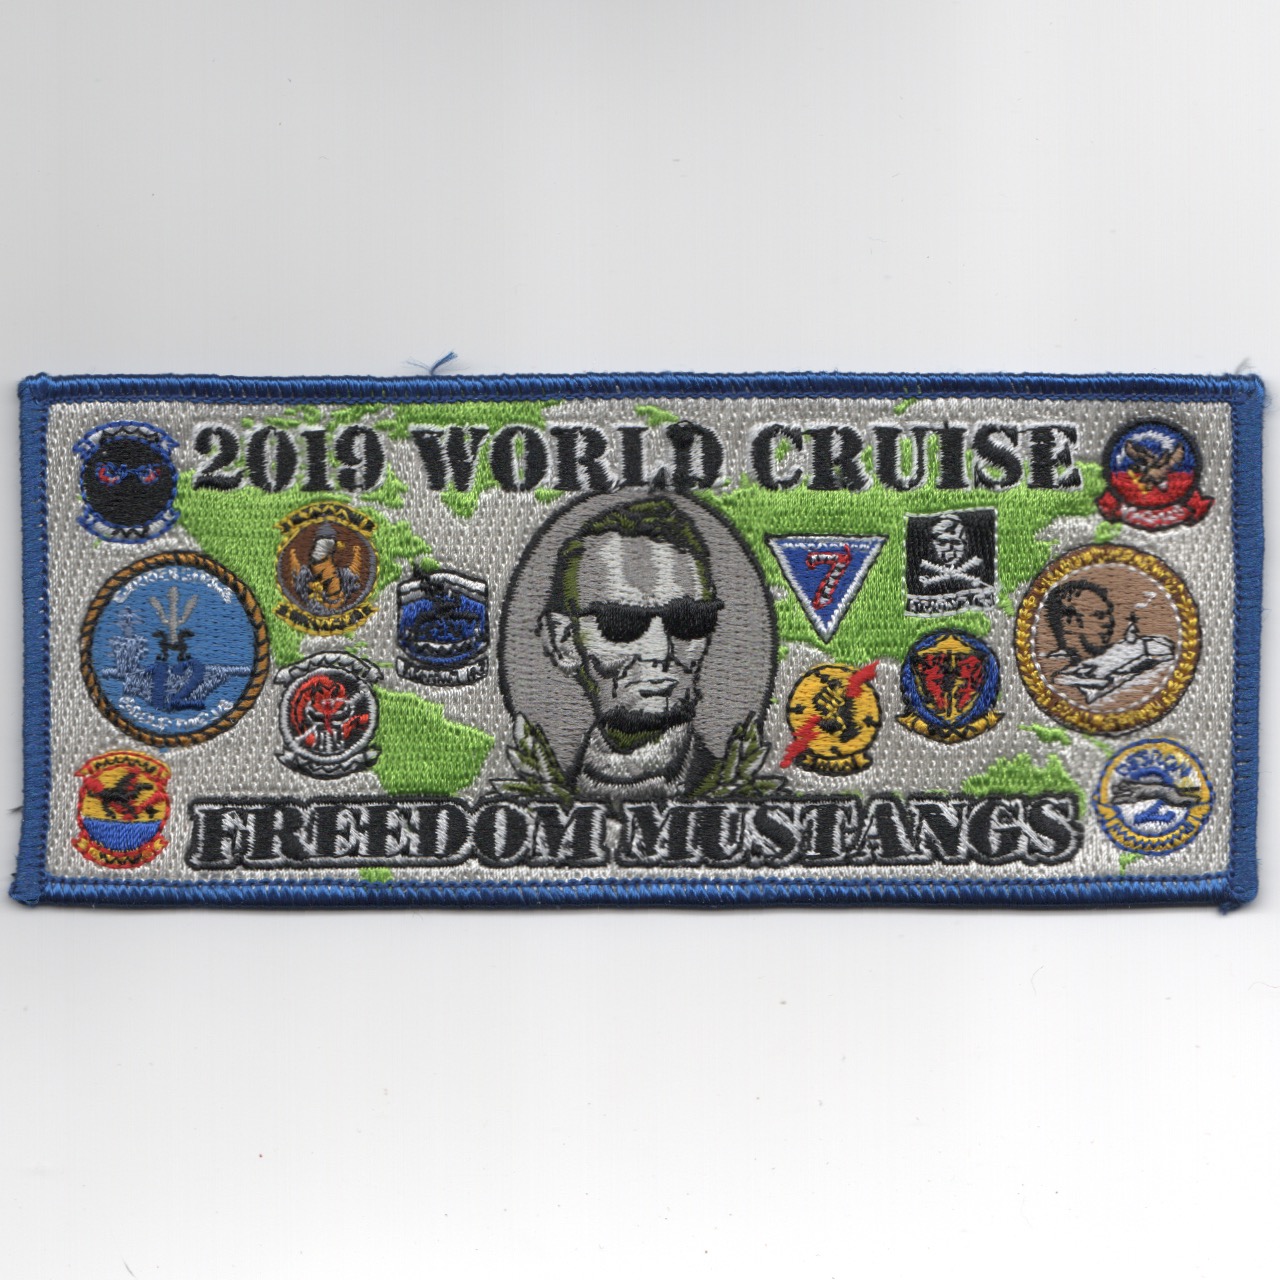 VFA-143 2019 'FREEDOM' Cruise Patch